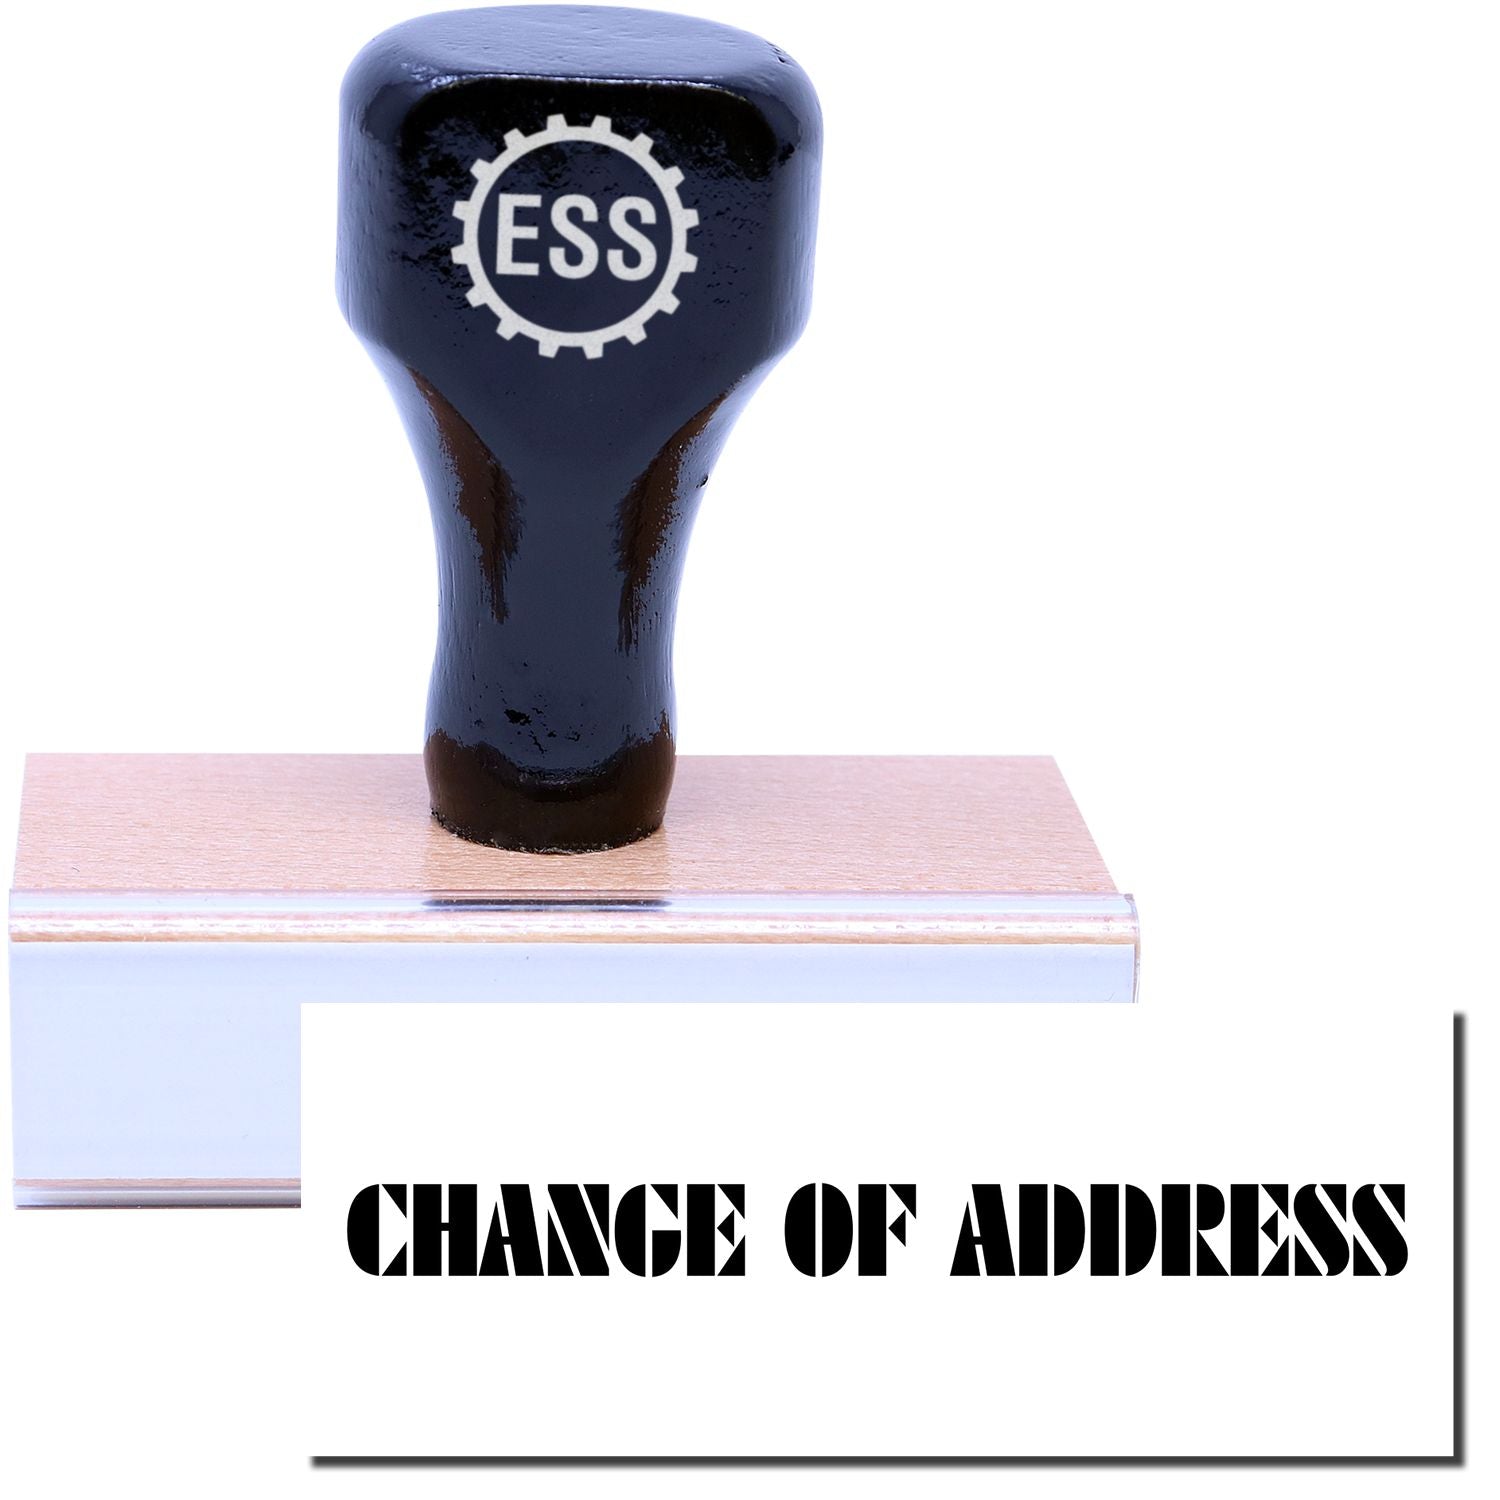 A stock office rubber stamp with a stamped image showing how the text "CHANGE OF ADDRESS" in a large font is displayed after stamping.